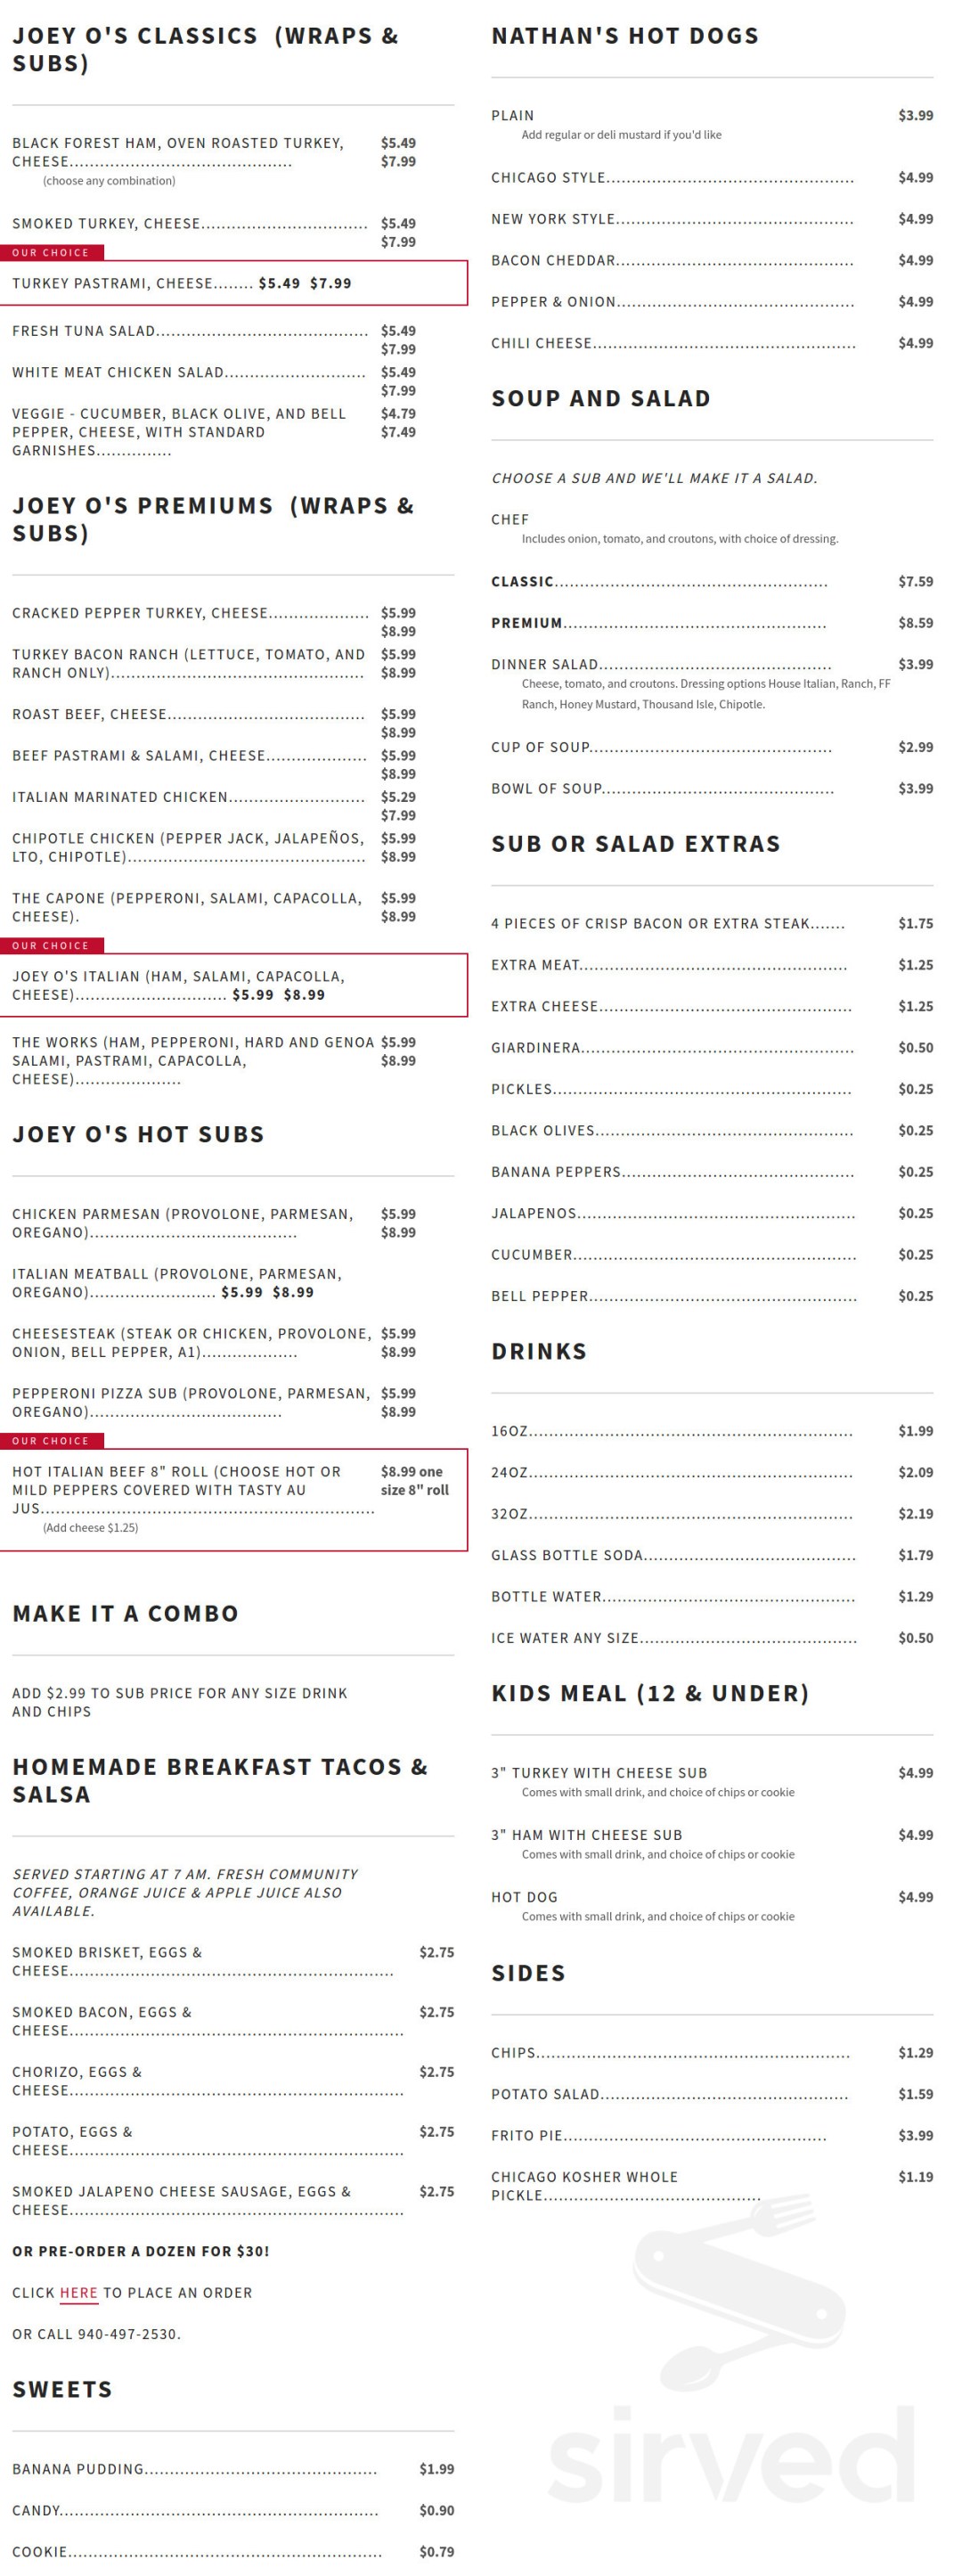 Picture of: The Original Joey O’s menu in Corinth, Texas, USA